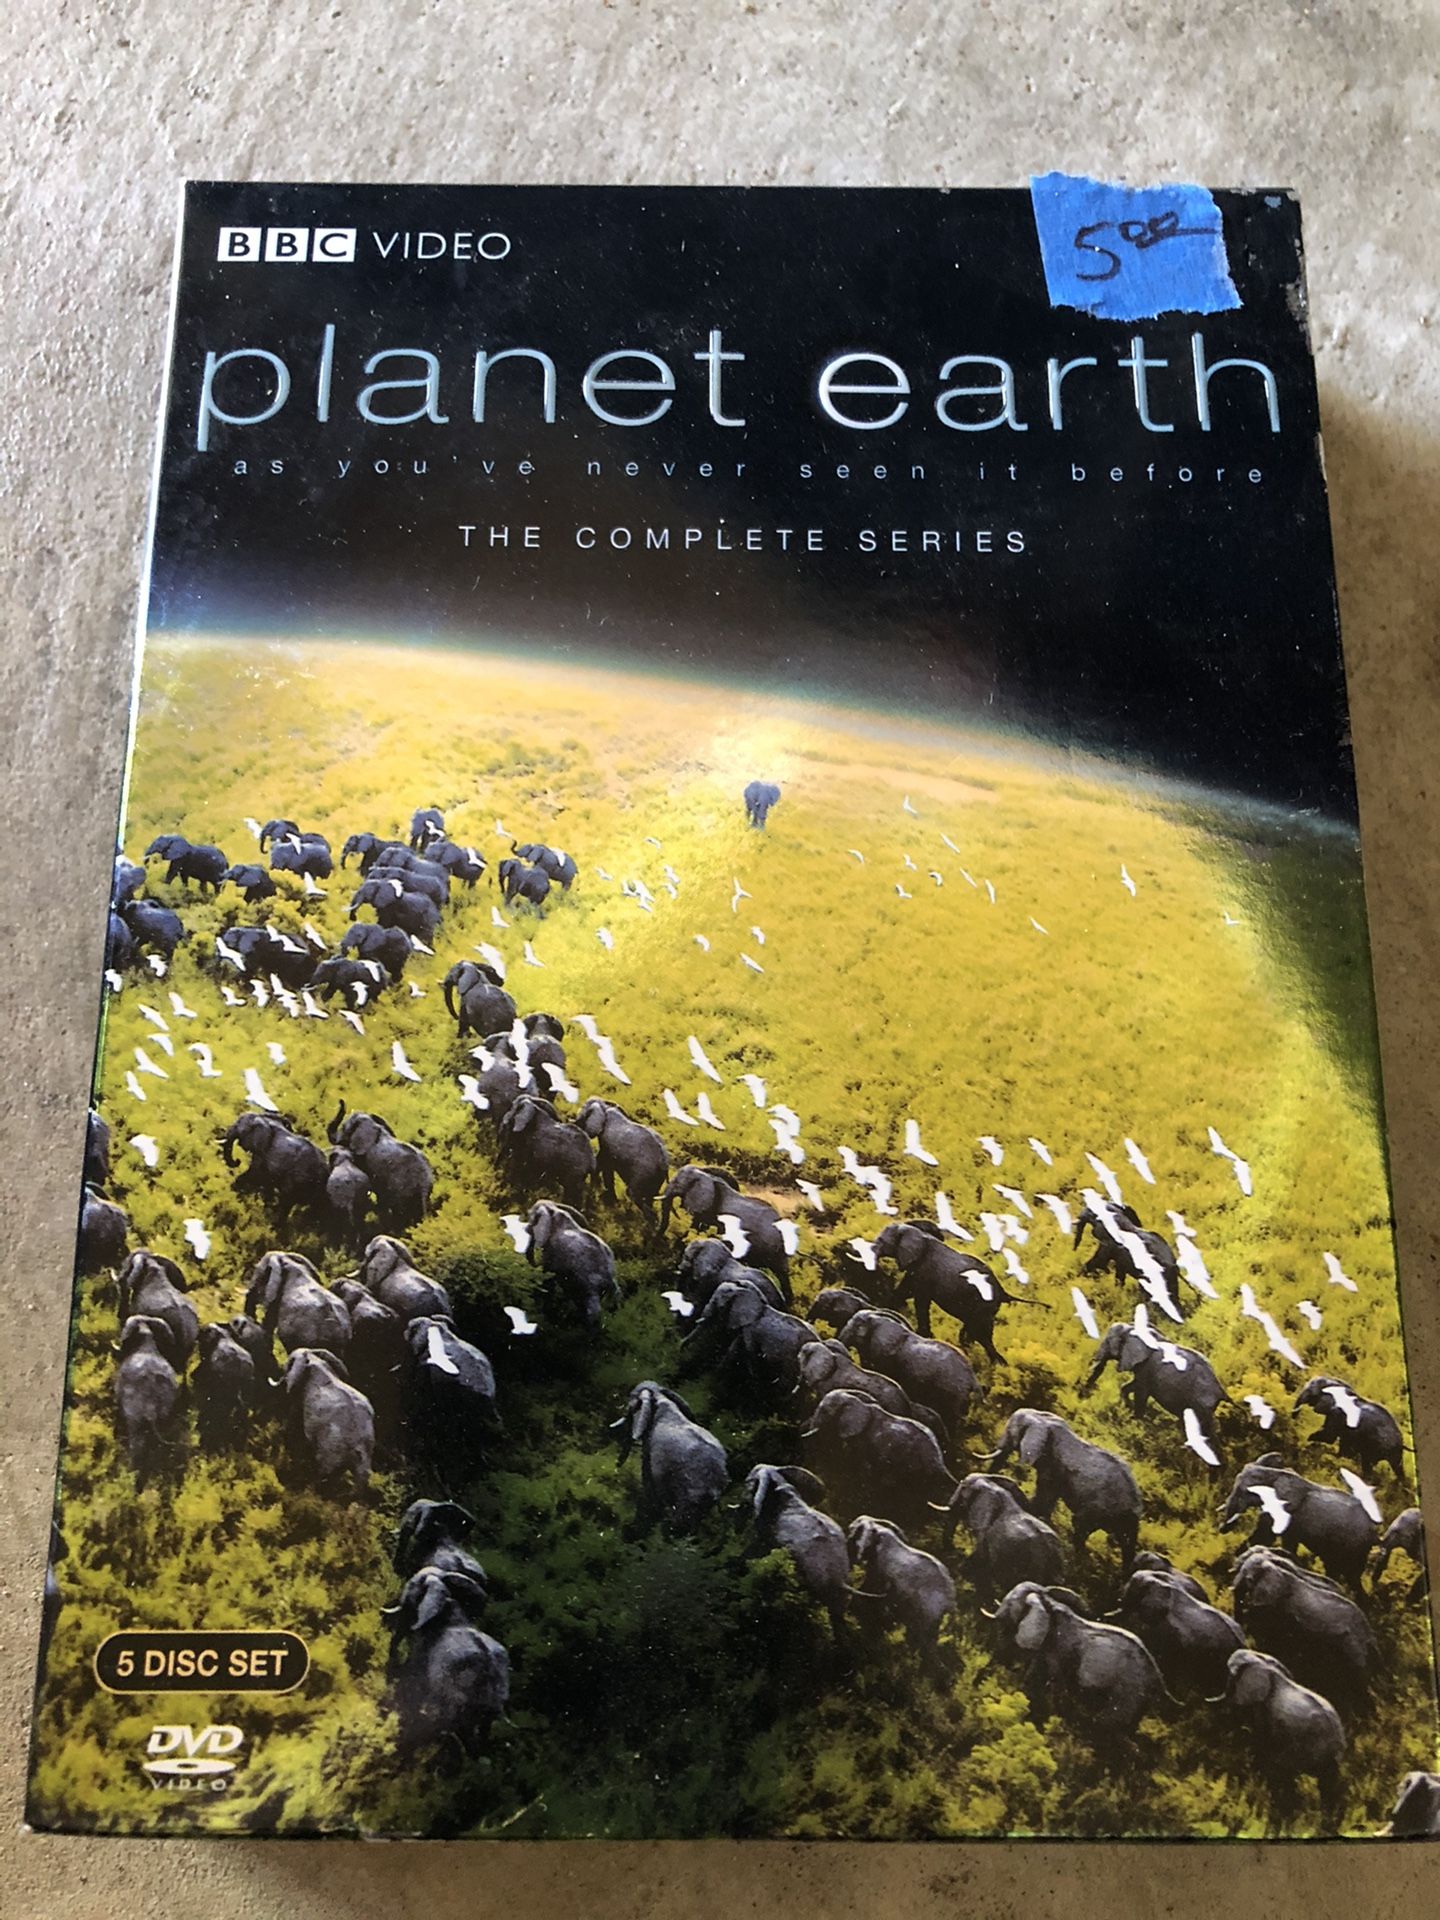 Planet Earth DVD’s - The Complete Series